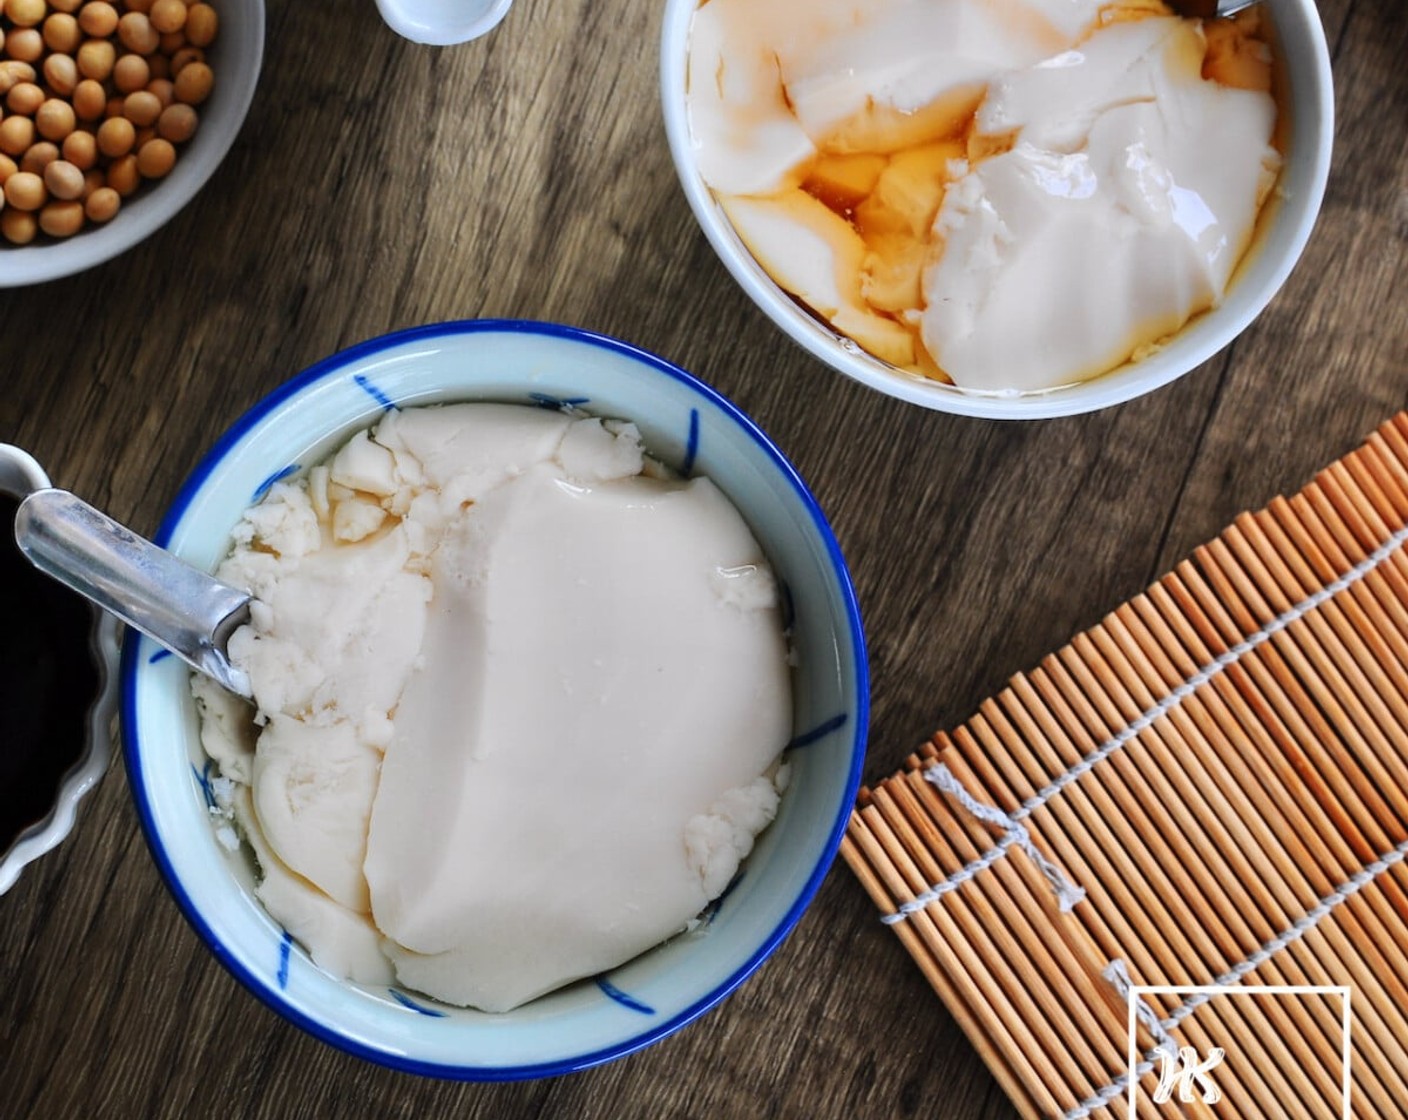 step 15 To serve, use the sharp and flat ladle to gently scoop thin slices of soft and velvety beancurd into bowls. Then top with ginger sugar syrup or palm sugar syrup before serving.